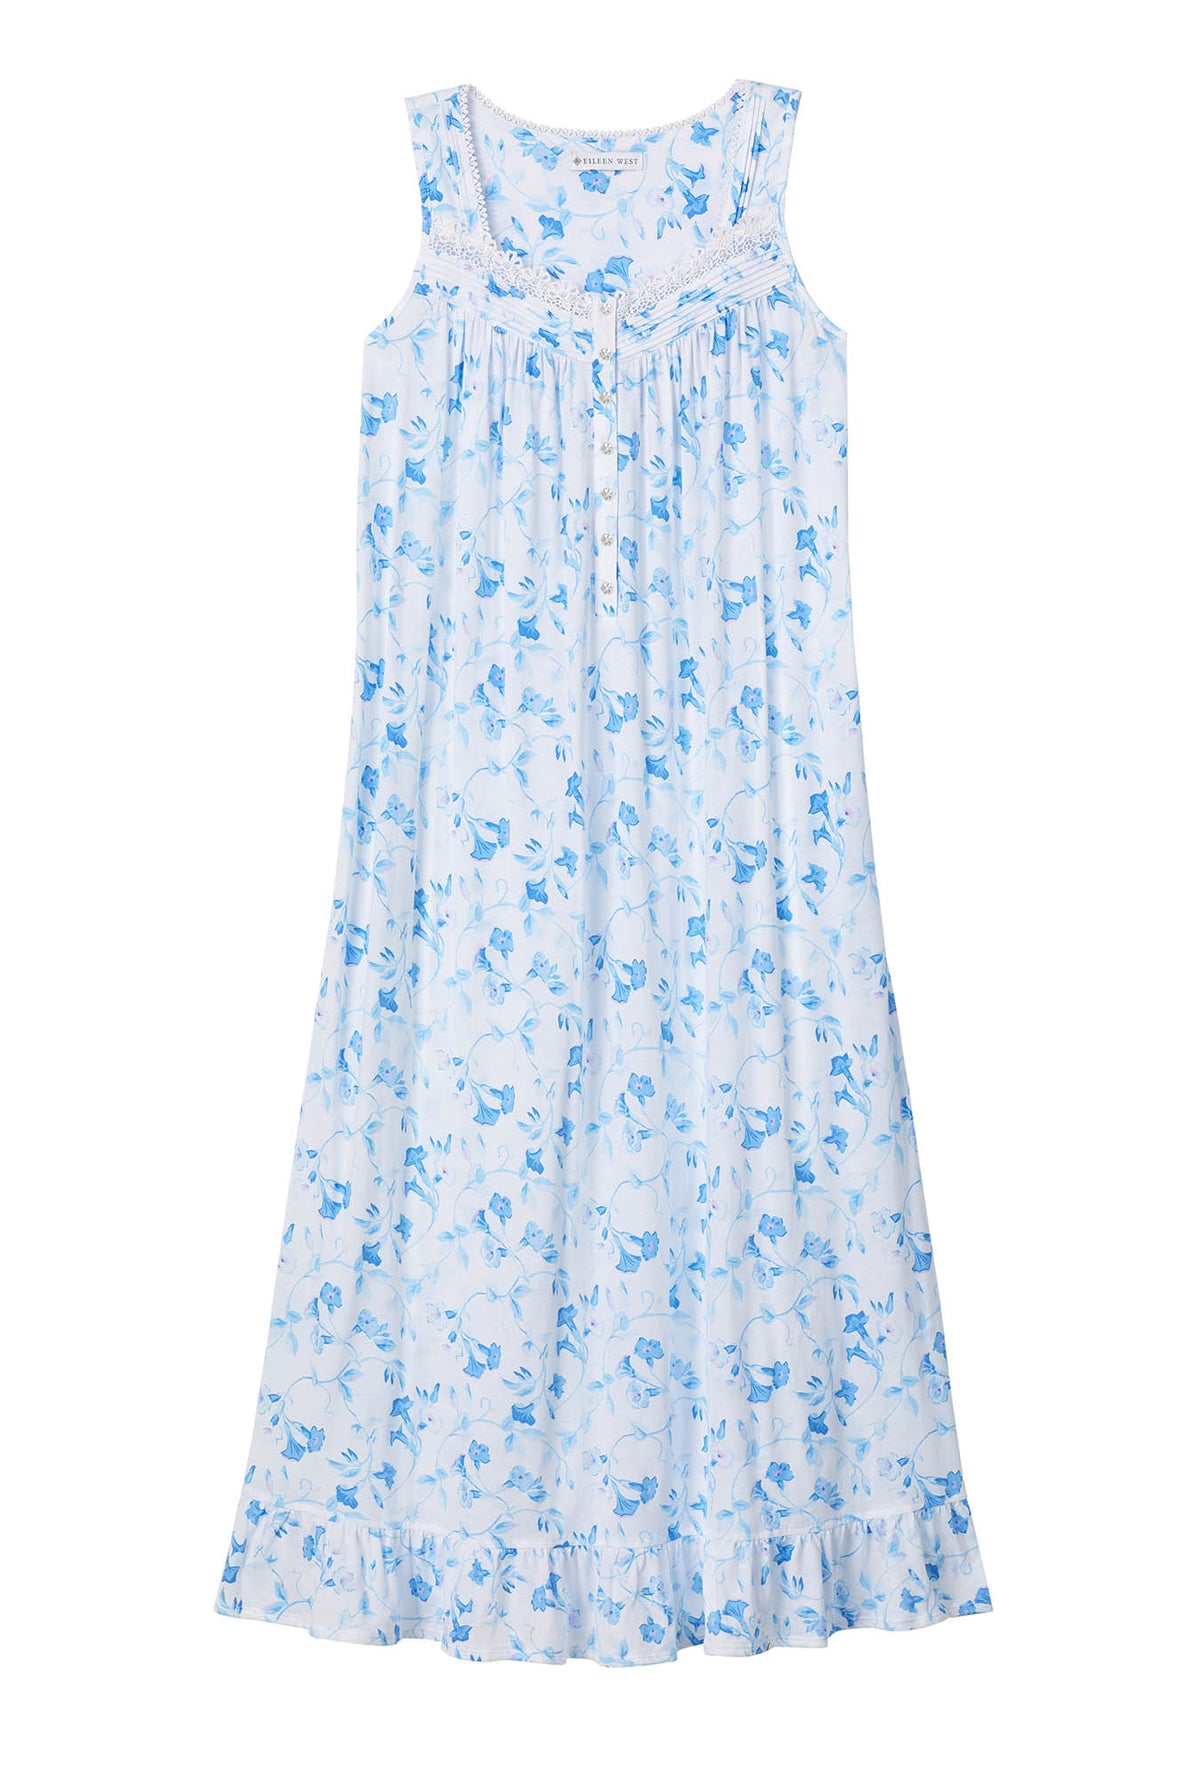 Knit eileen nightgown with morning glory print.